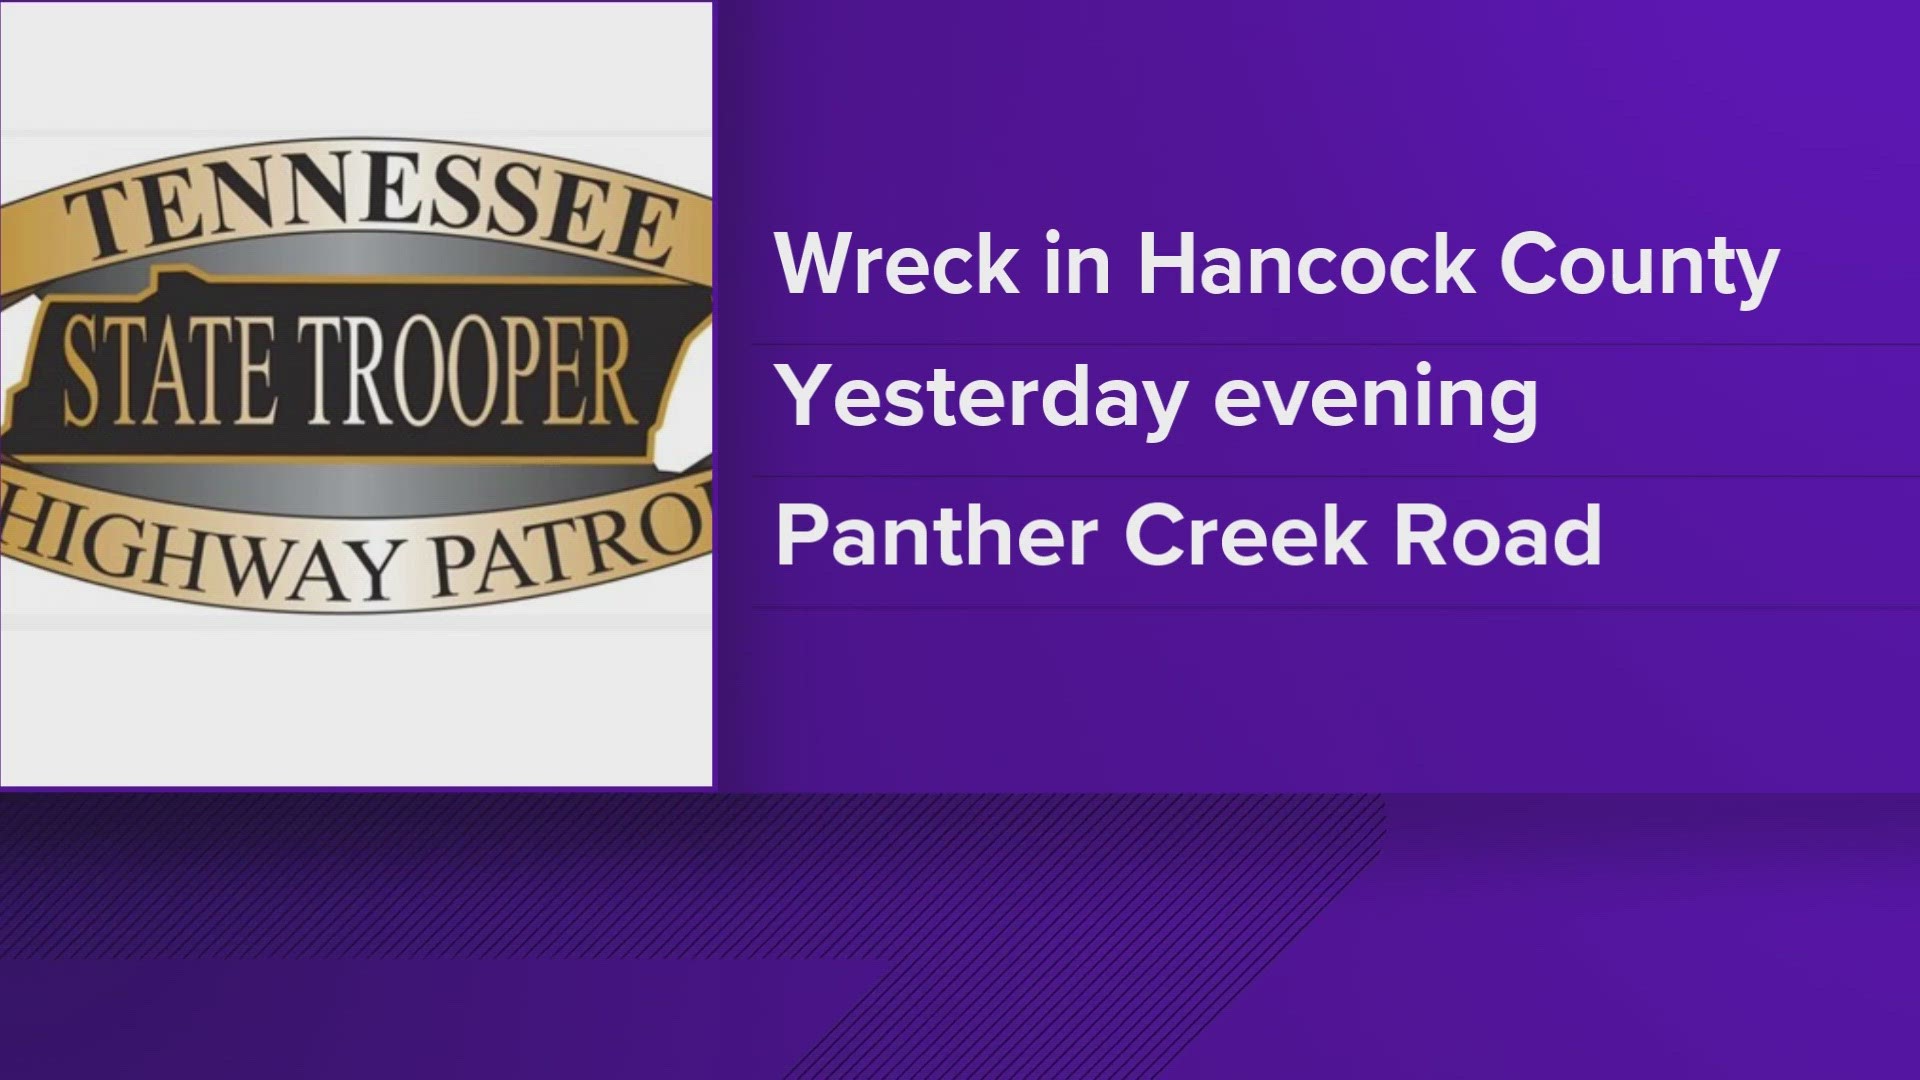 The incident happened on Panther Creek Road on Sunday evening, according to the Tennessee Highway Patrol.